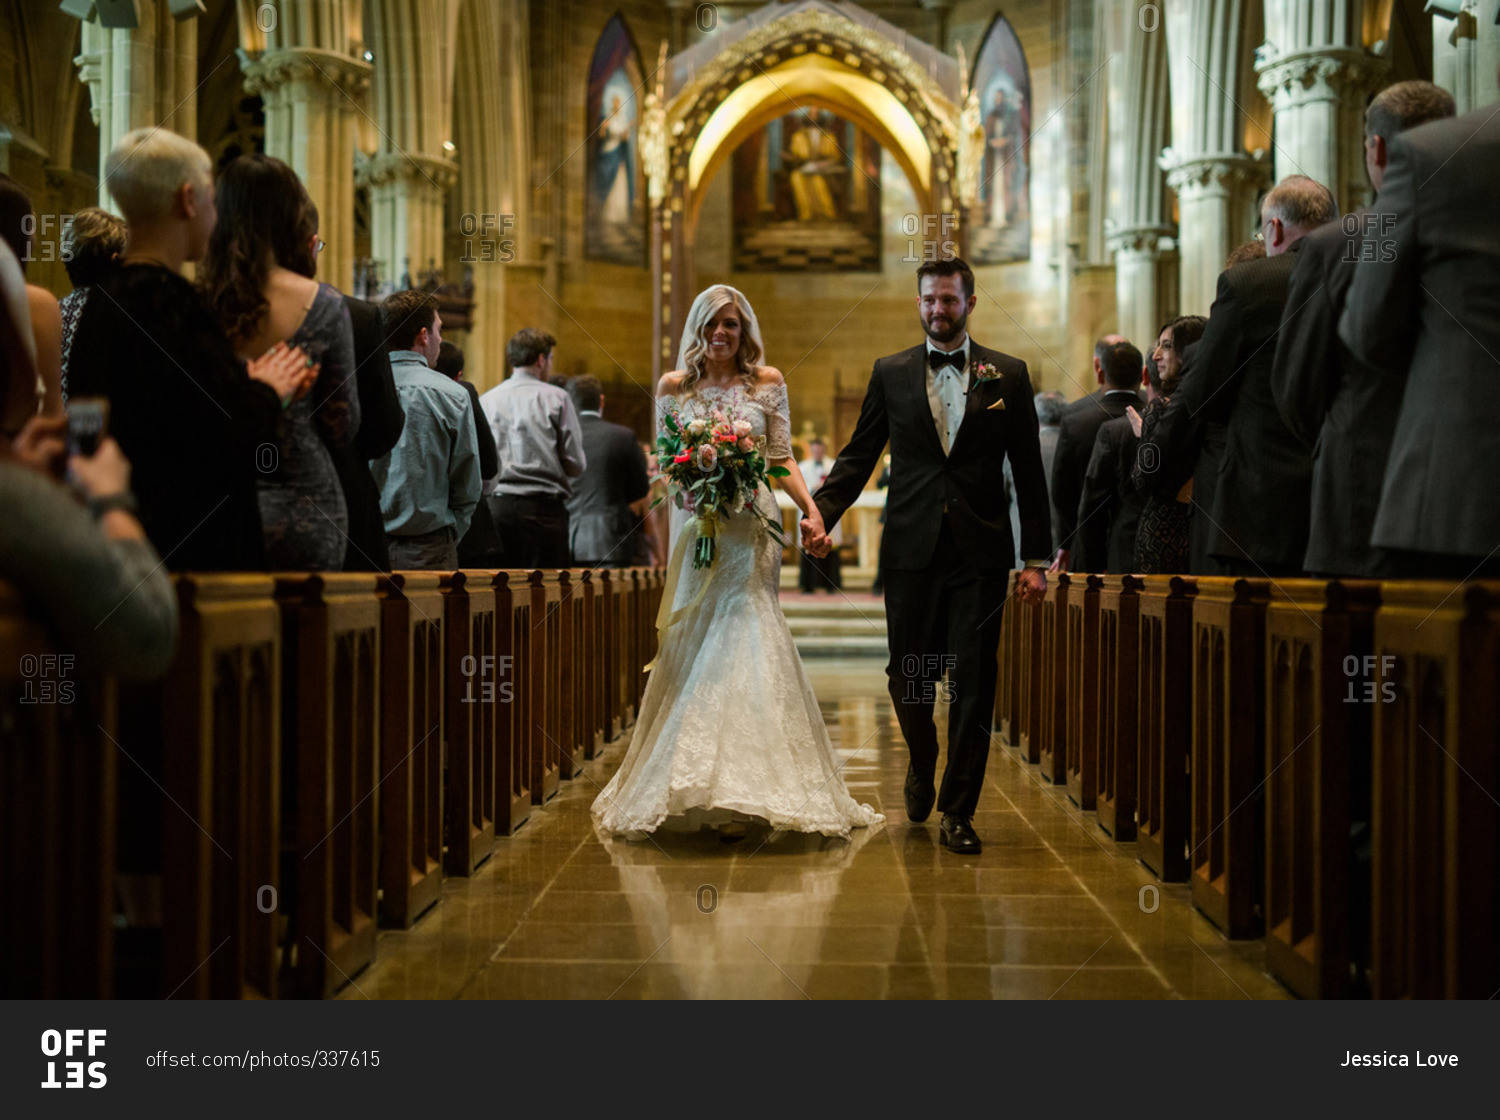 Bride and groom walk down church aisle holding hands